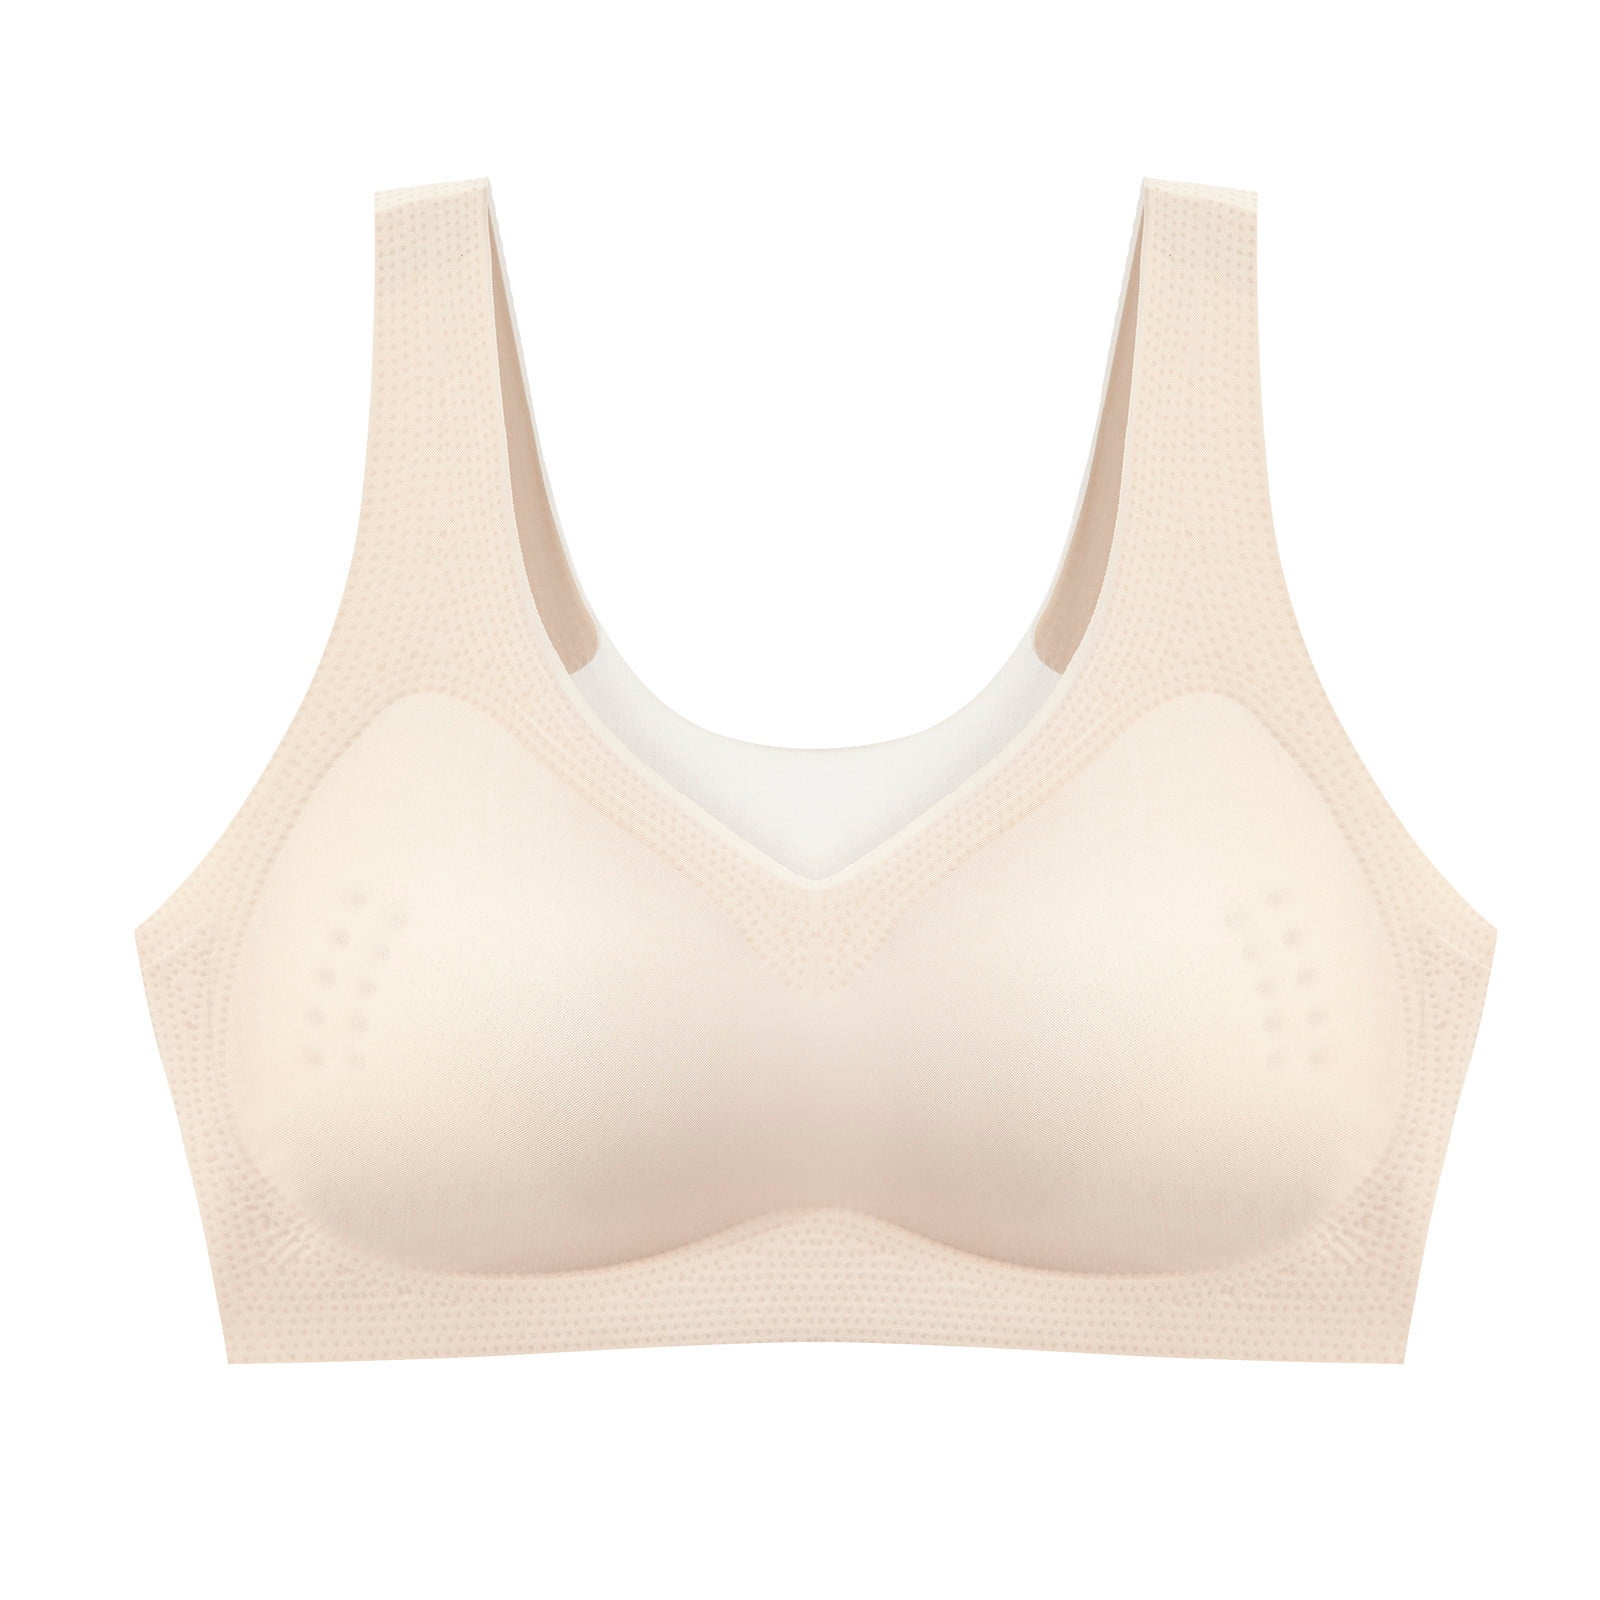 CAICJ98 Sports Bras For Women High Impact Women Sports Bra Front Closure  Double Deck Mesh Running Bra for Plus Size for Plus Size Beige,XL